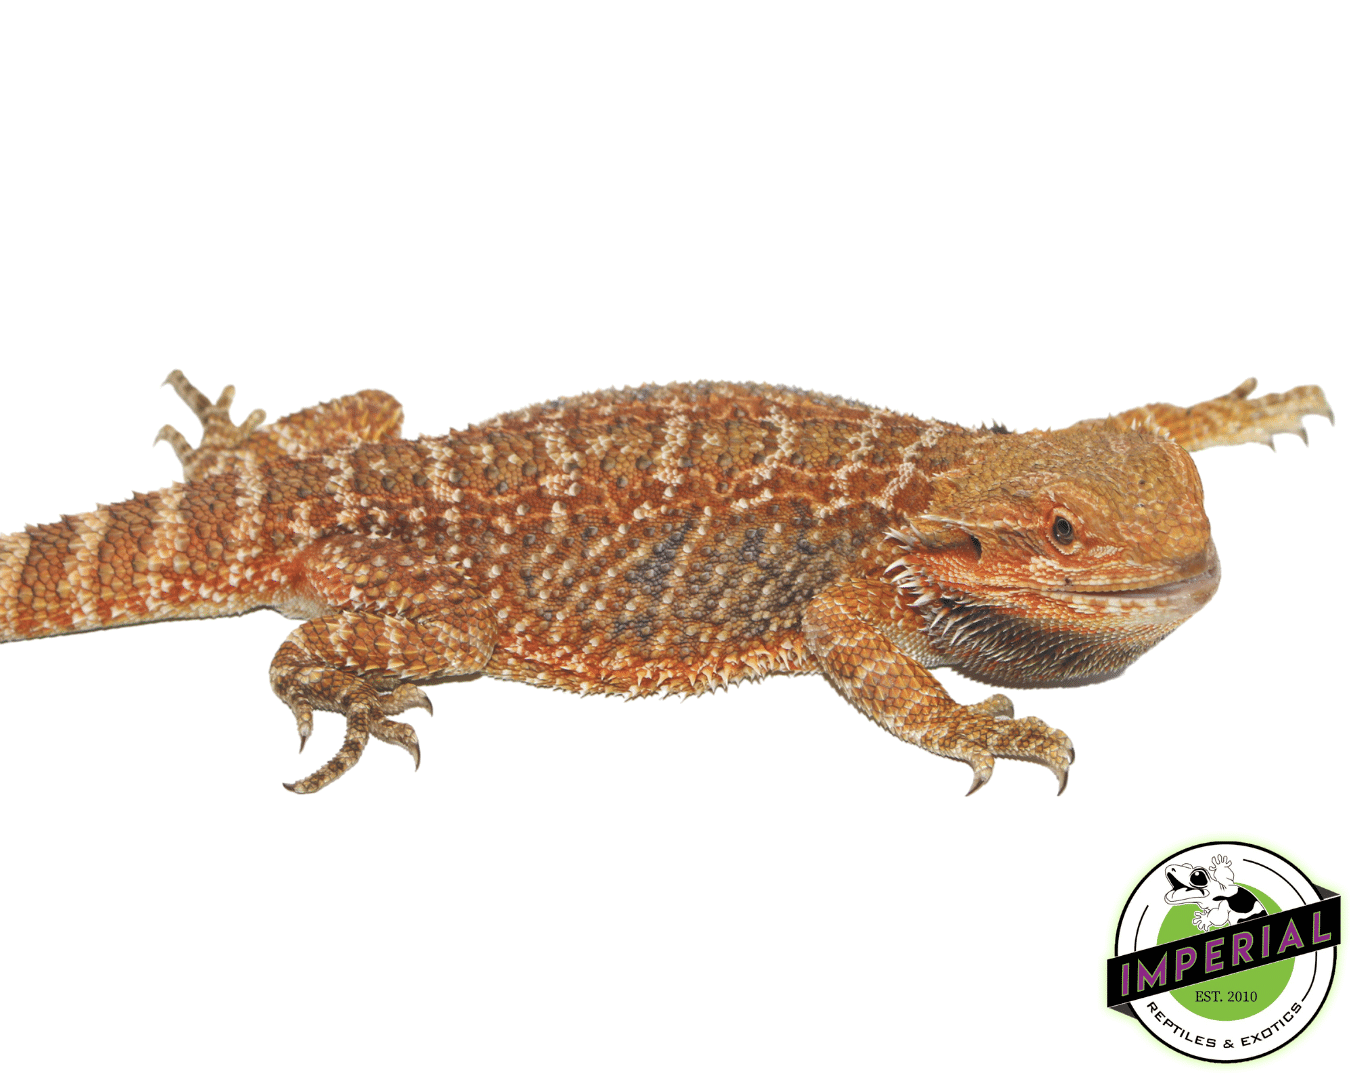 Red bearded dragon for sale, buy reptiles online